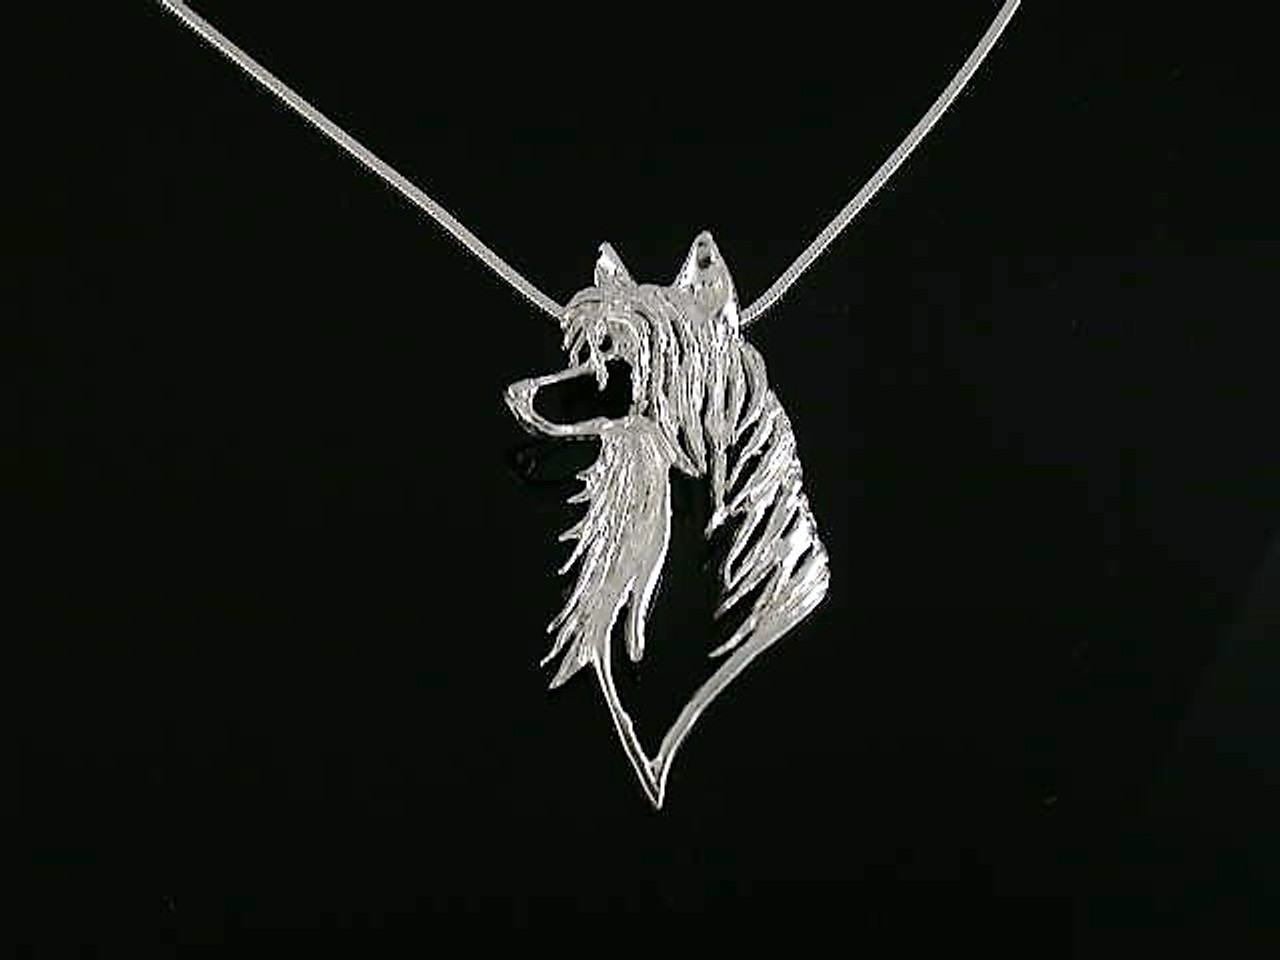 Chinese Crested Head Cutout Lrg Pendant